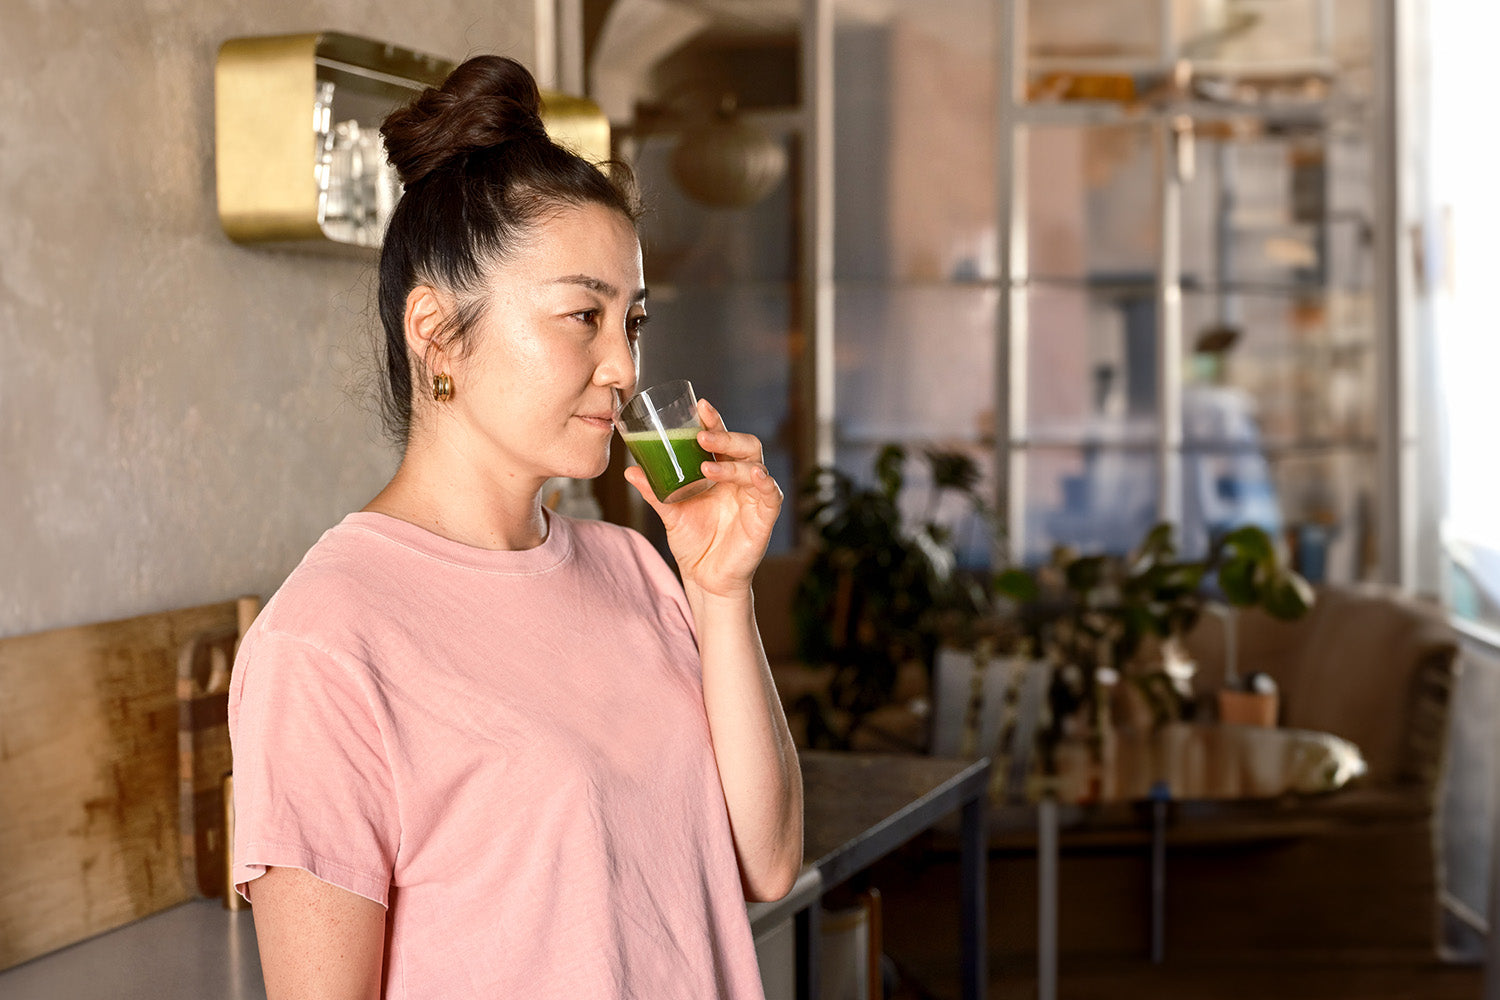 A person takes in the vegetal aroma of a sparkling matcha made with freshly-ground matcha leaves.